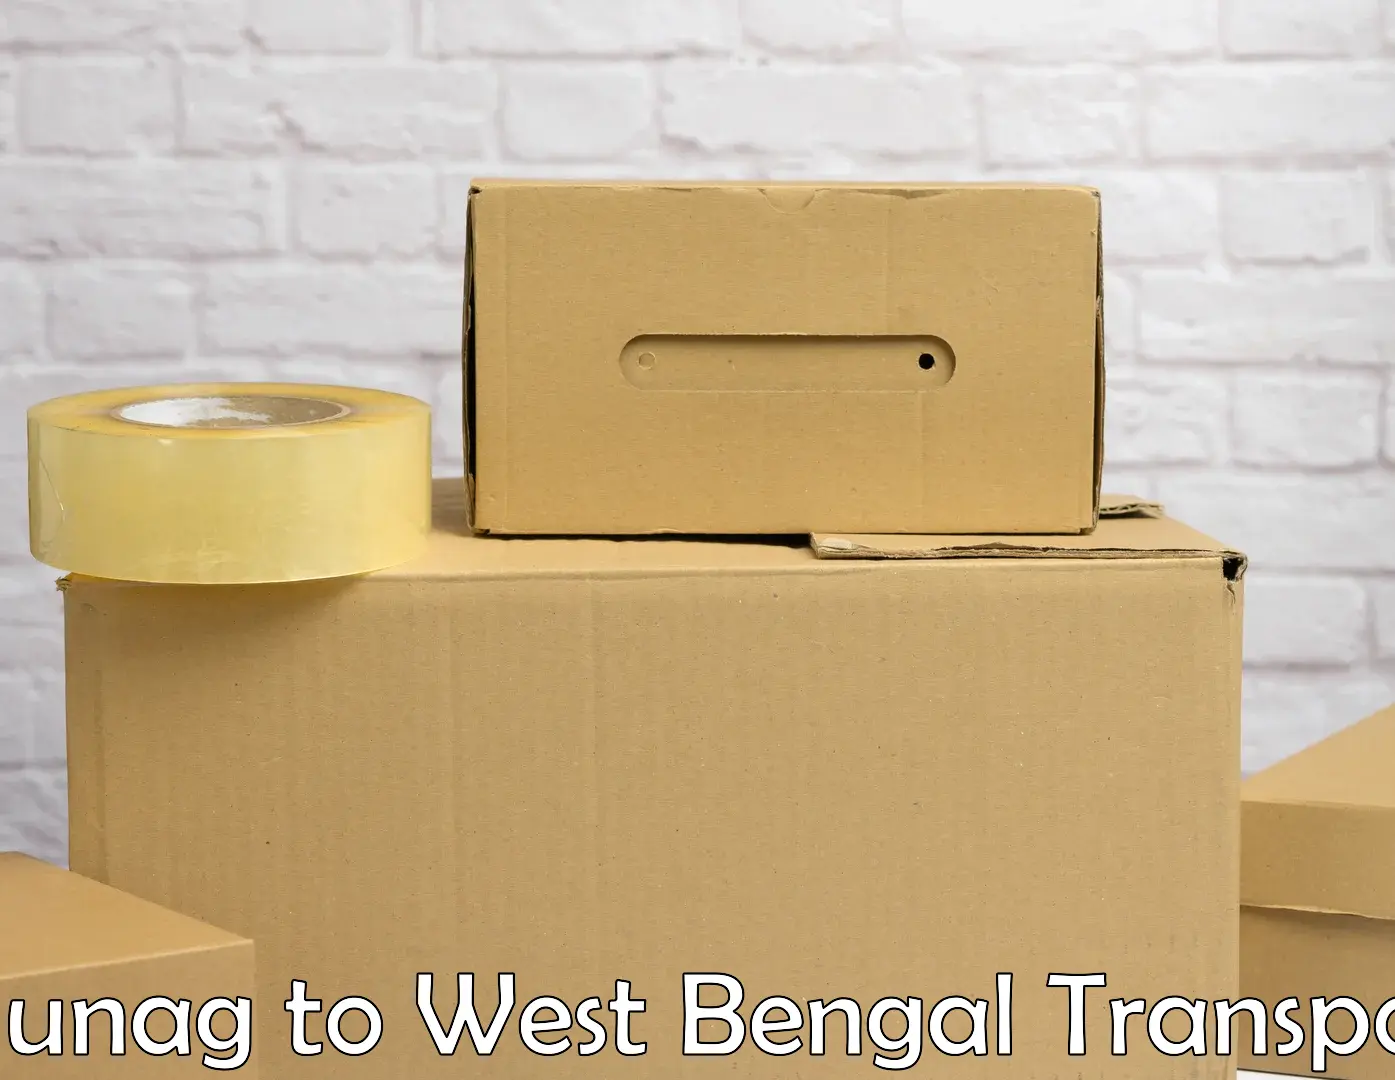 Truck transport companies in India Thunag to West Bengal